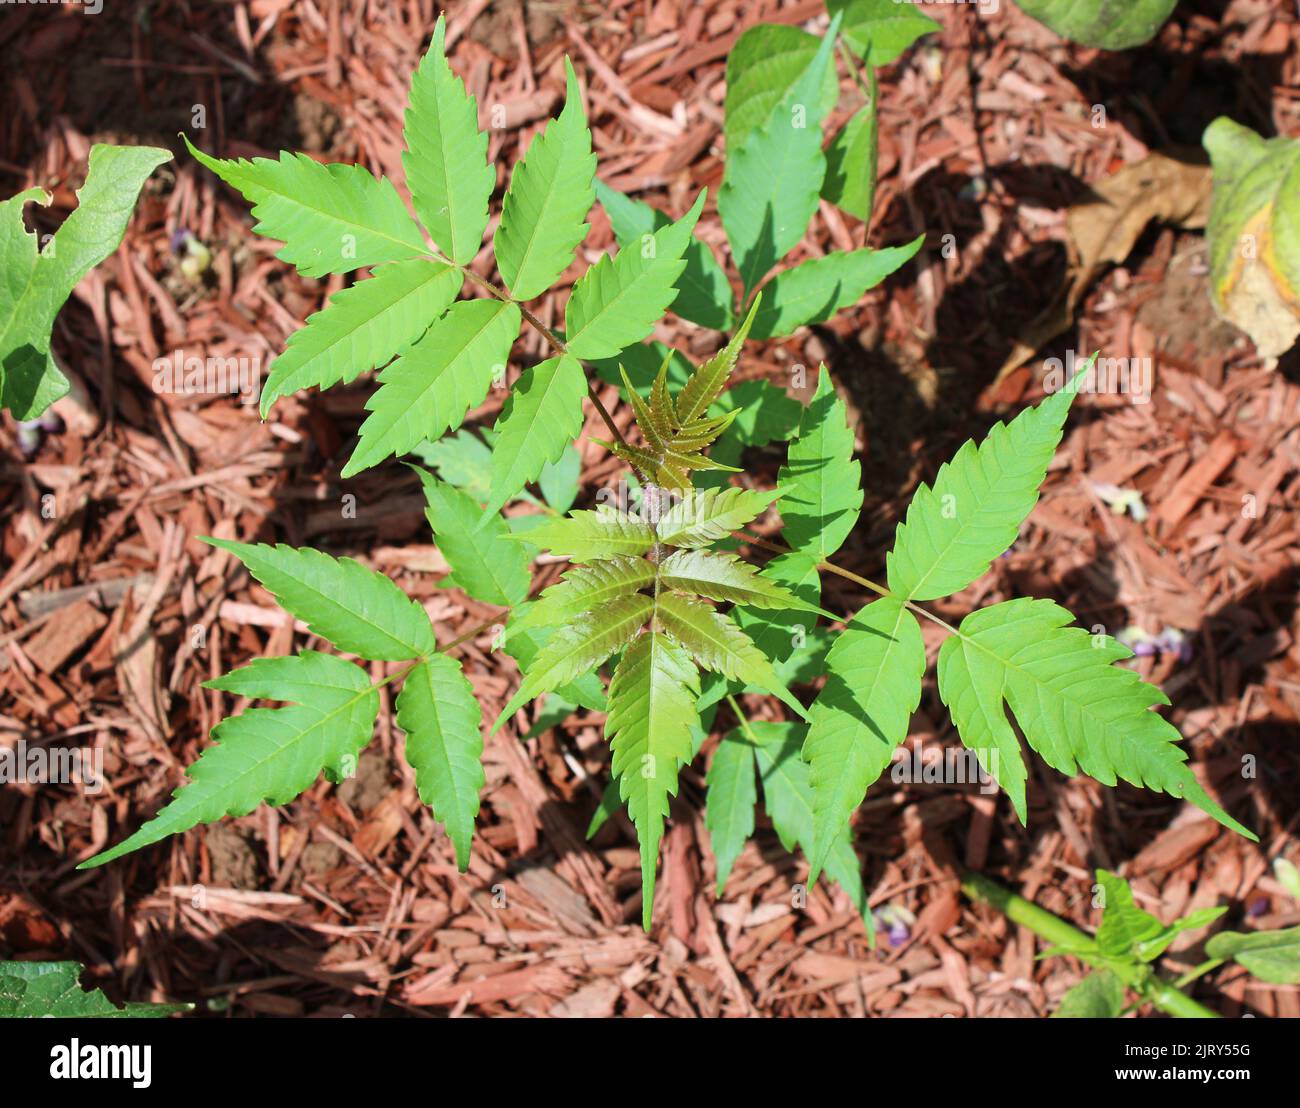 A Young Staghorn Sumac Sapling Stock Photo